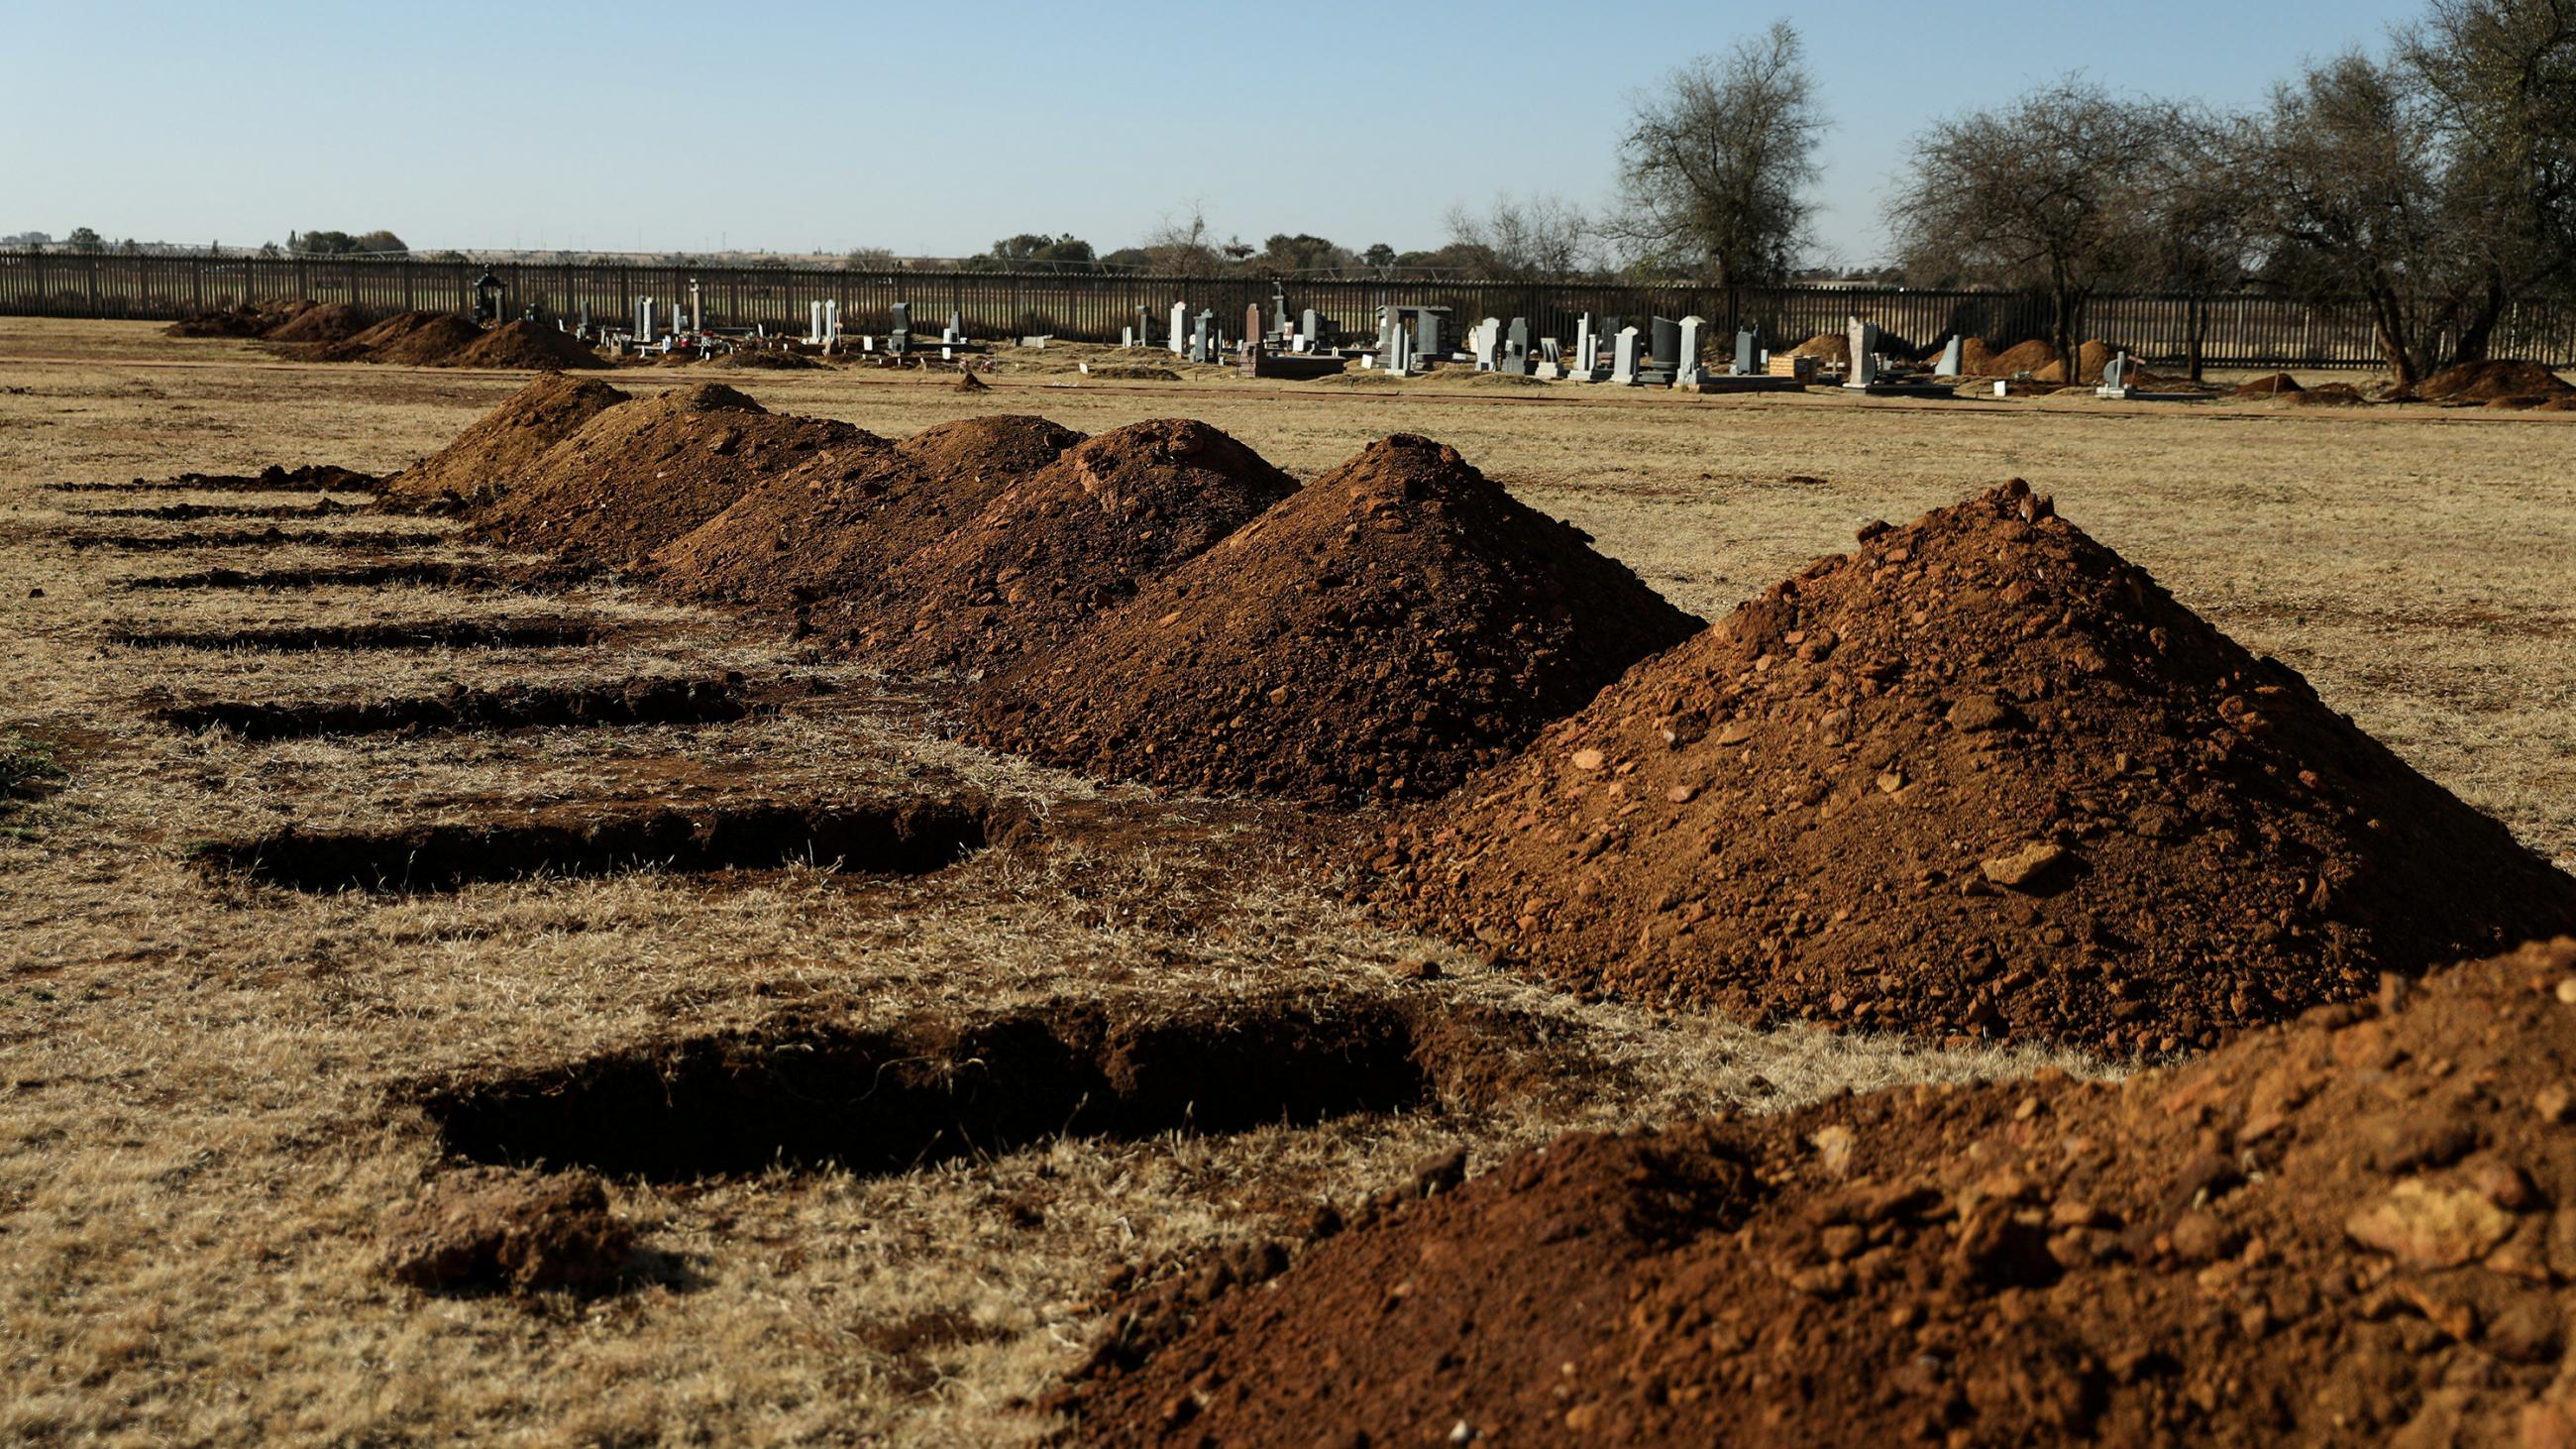 The photo shows mounds of freshly turned dirt next to open graves. 